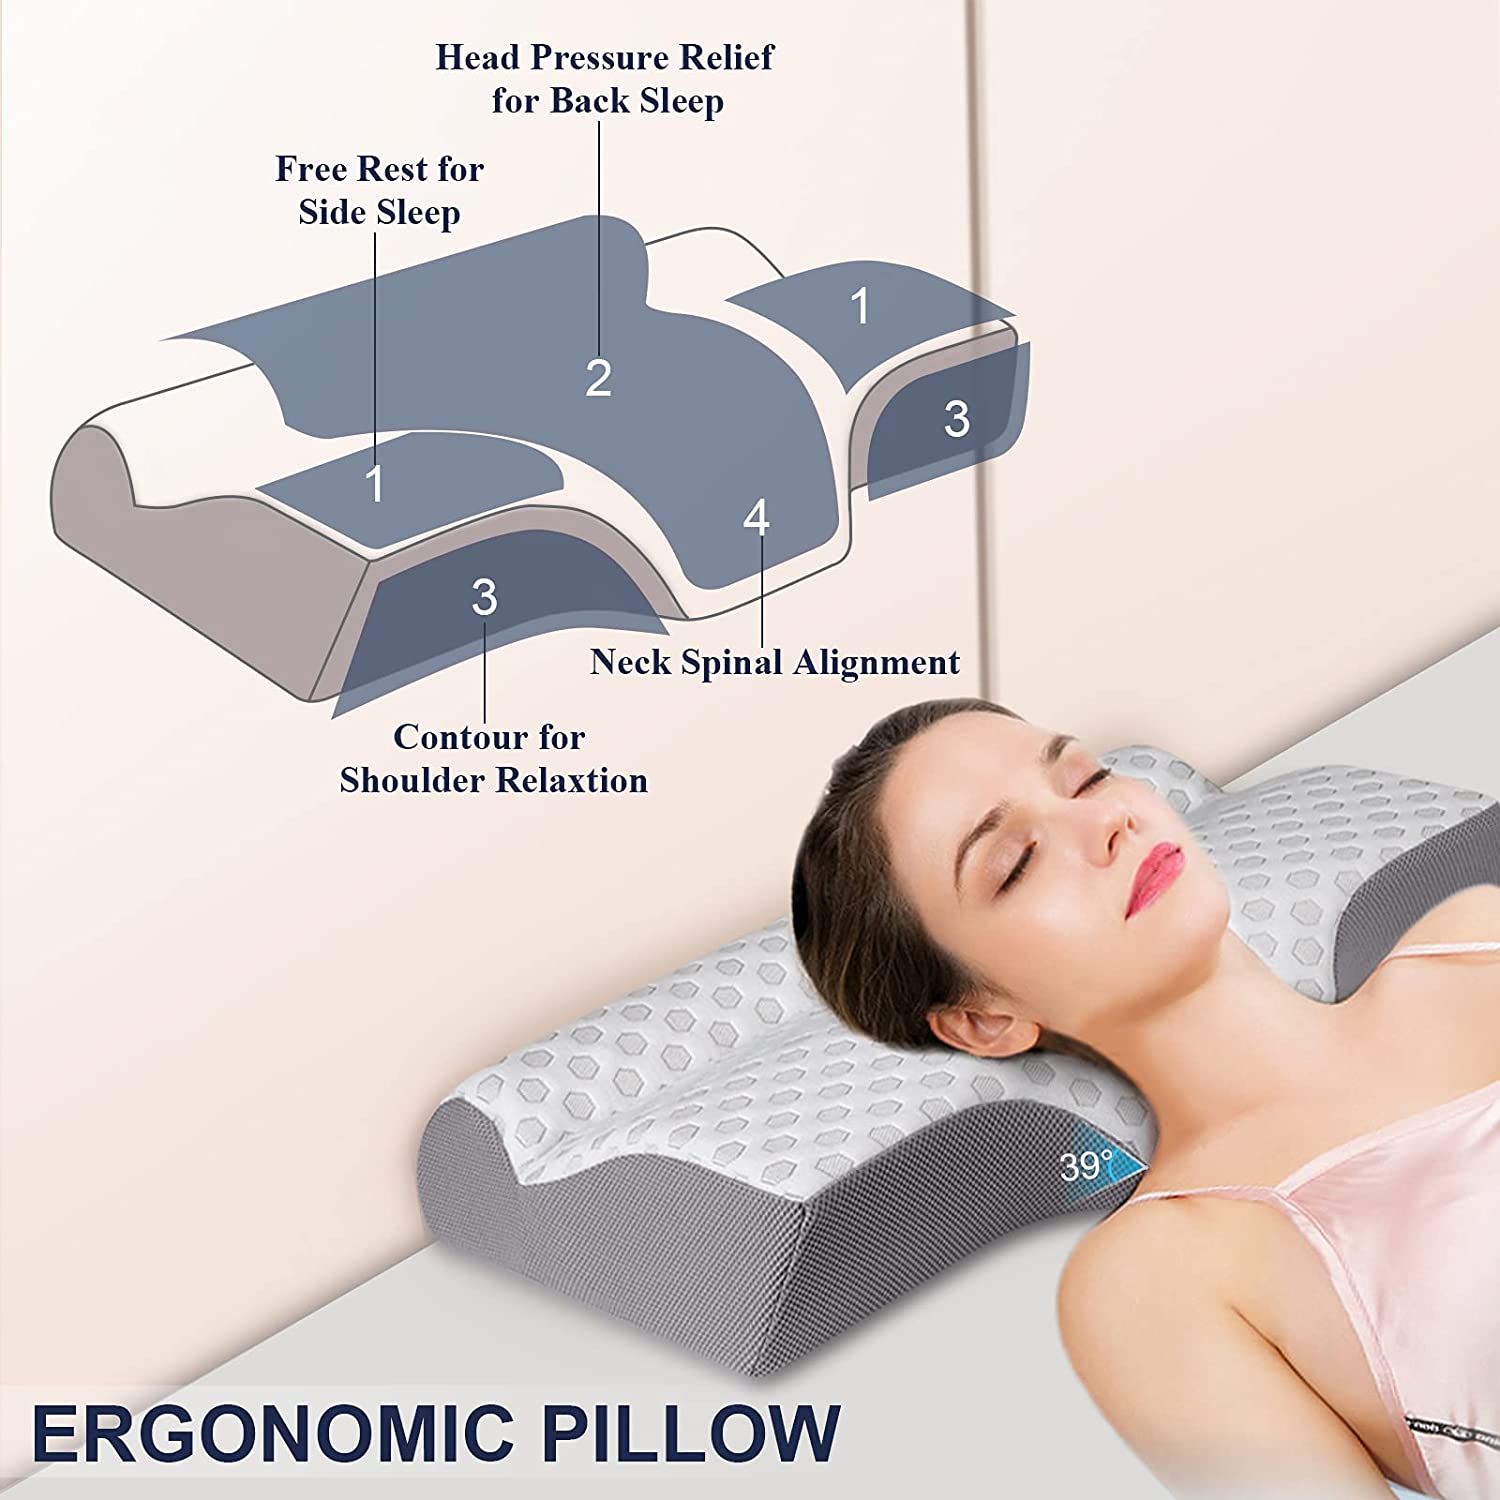 Cervical Pillow for Neck Pain Relief, Mkicesky 2 in 1 Neck Support Pillow and Neck Stretcher, Memory Foam Contour Pillows for Sleeping, Orthopedic Pillow for Neck Shoulder Pain and Side Back Sleepers